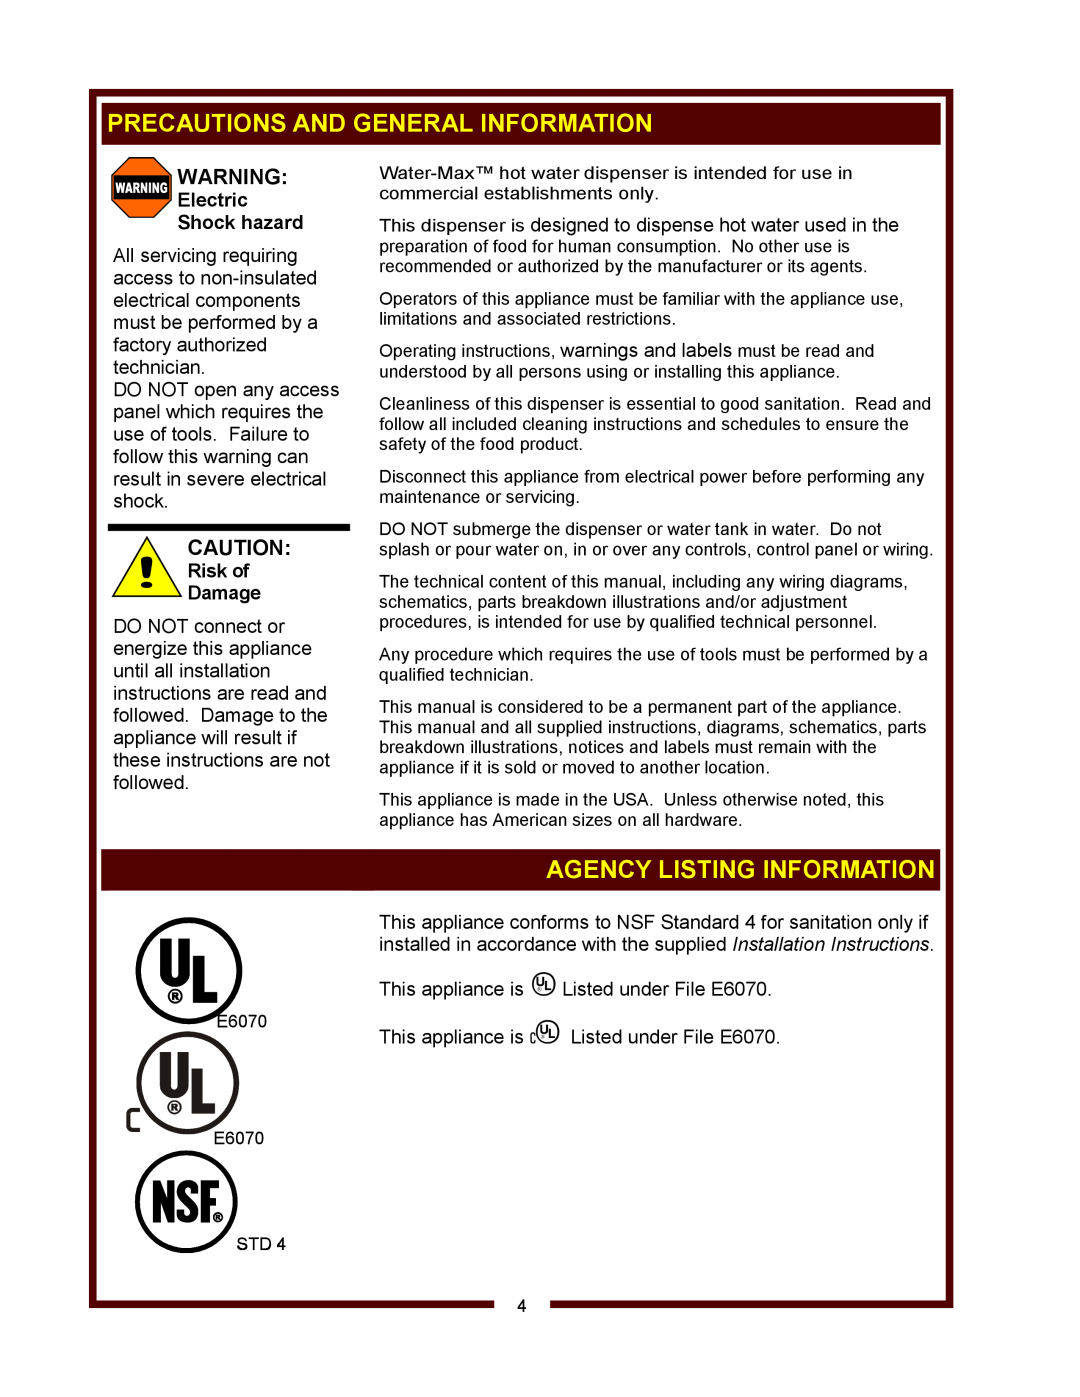 Wells WM-TR Precautions And General Information, Agency Listing Information, Electric Shock hazard, Risk of Damage 